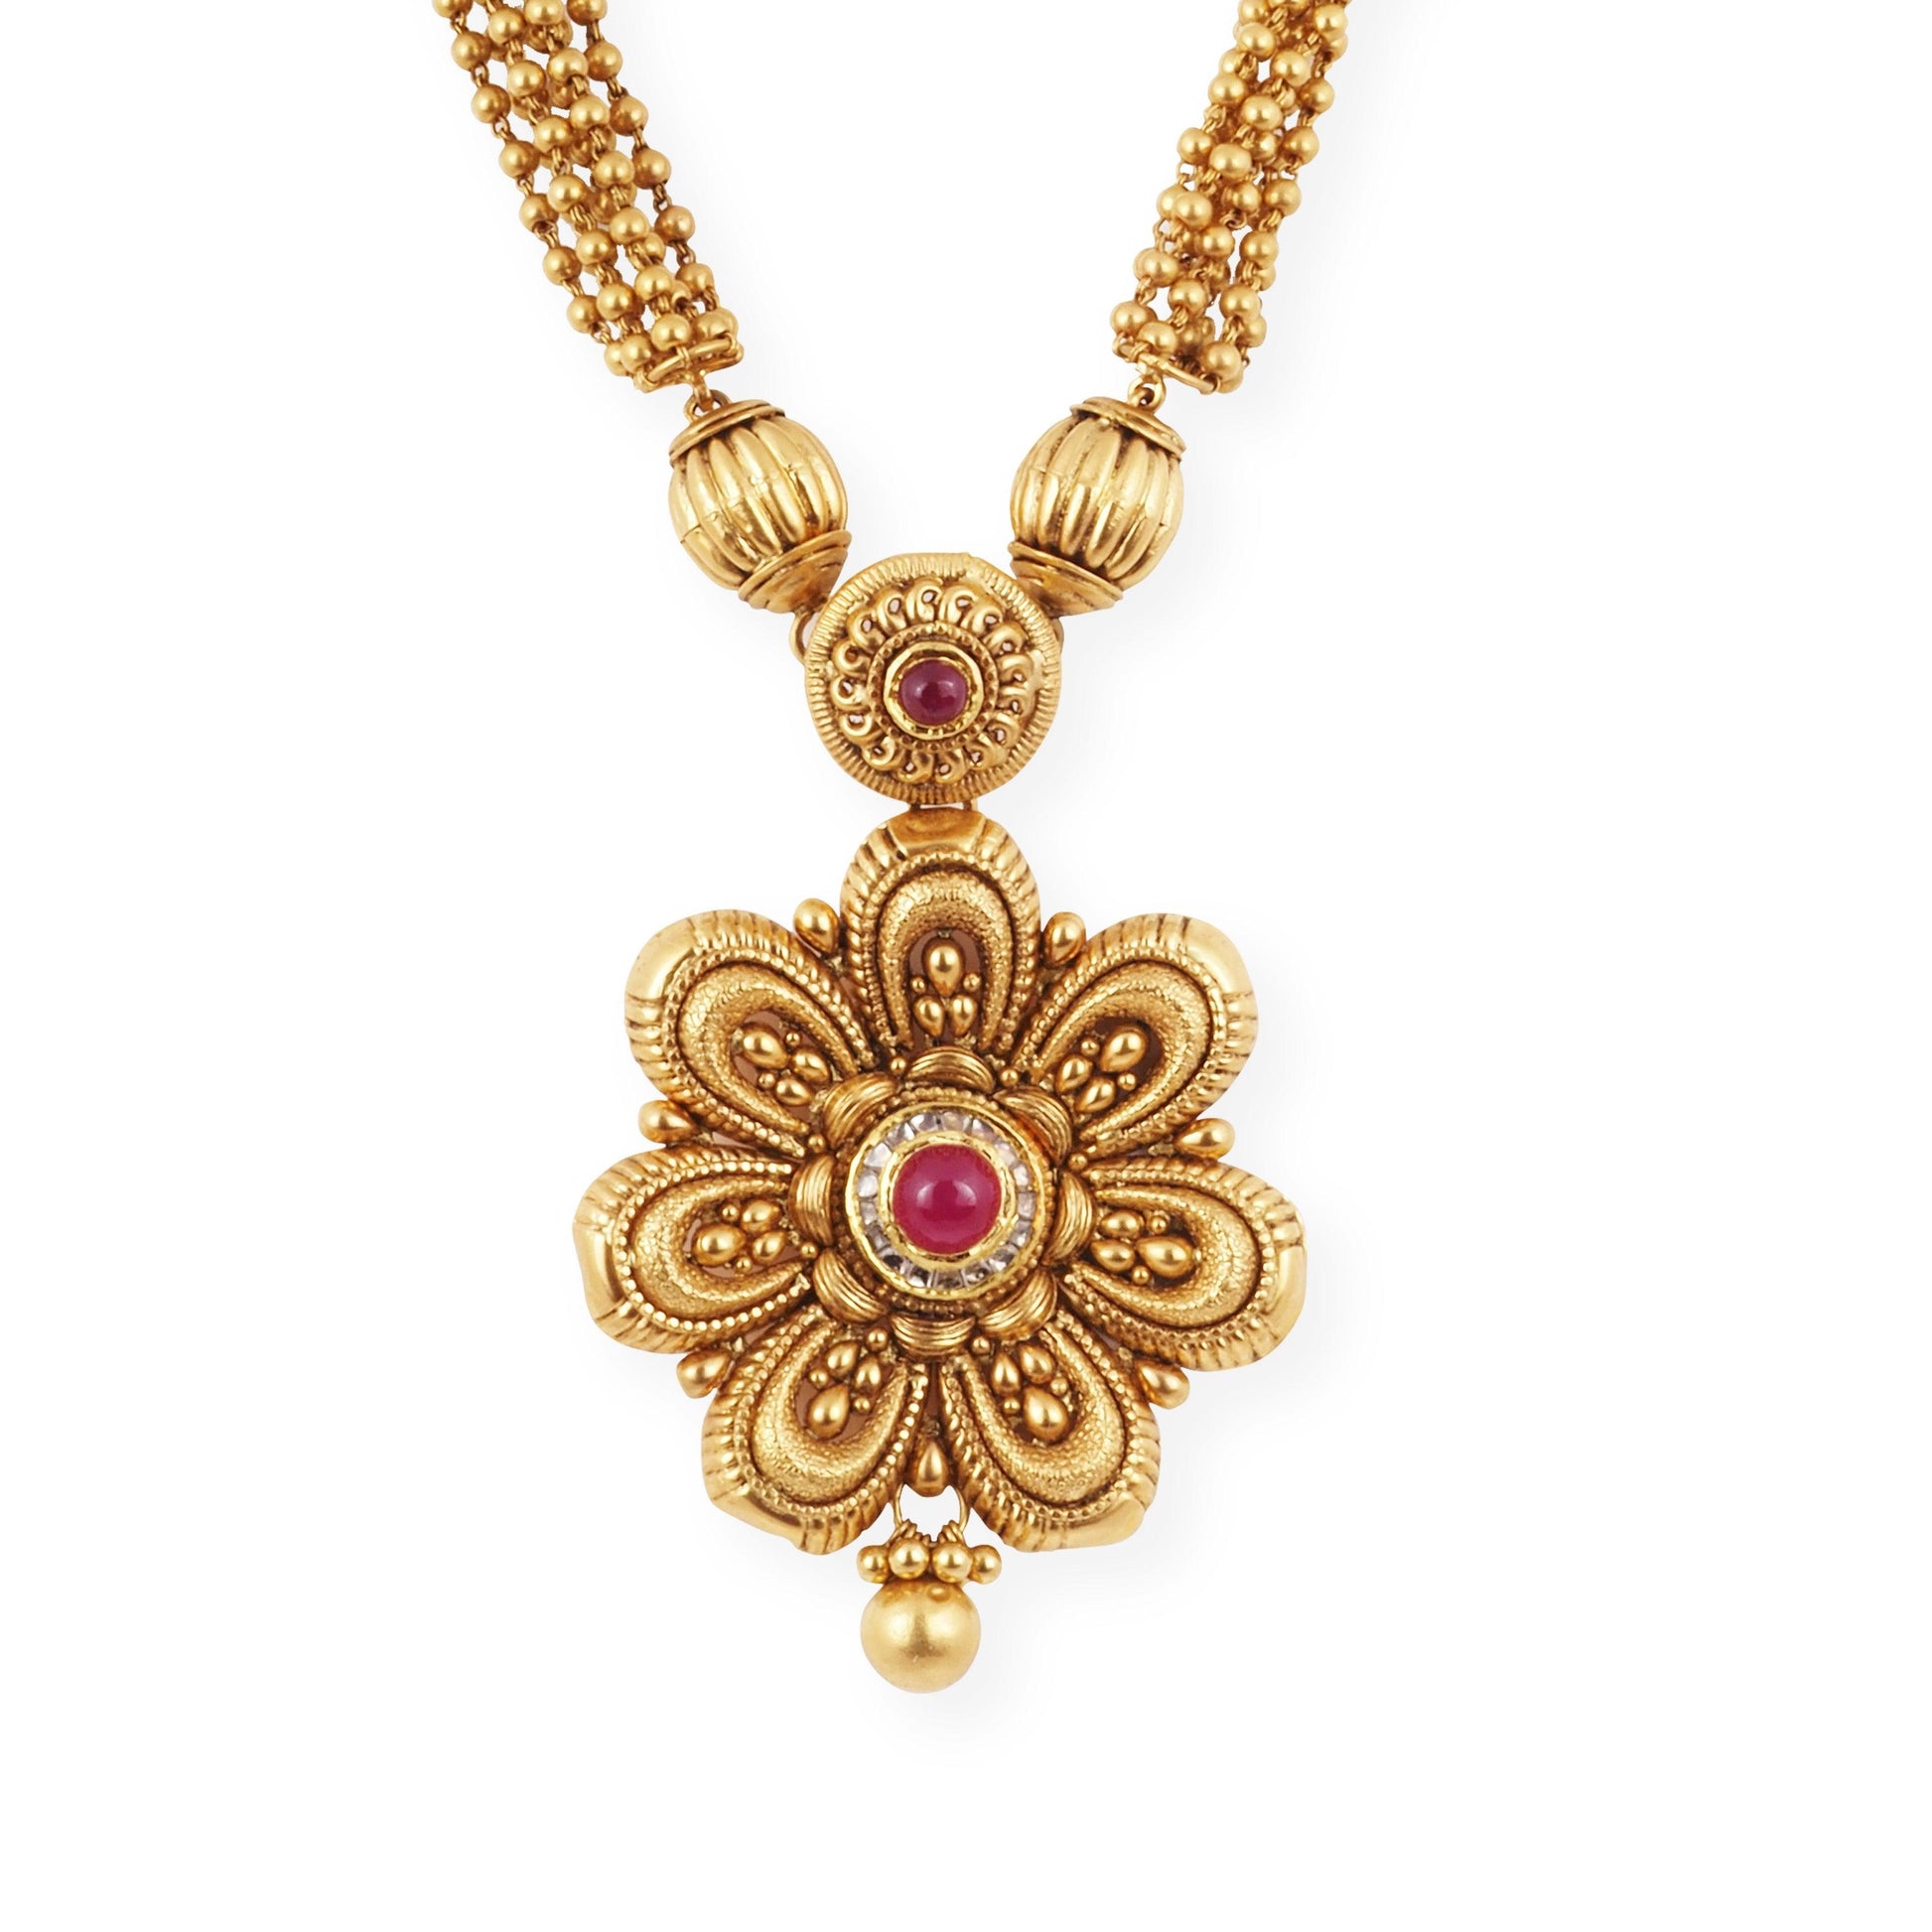 22ct Gold Antiquated Look Design Necklace Suite with Cubic Zirconia Stones & Hook Clasp-5191 - Minar Jewellers